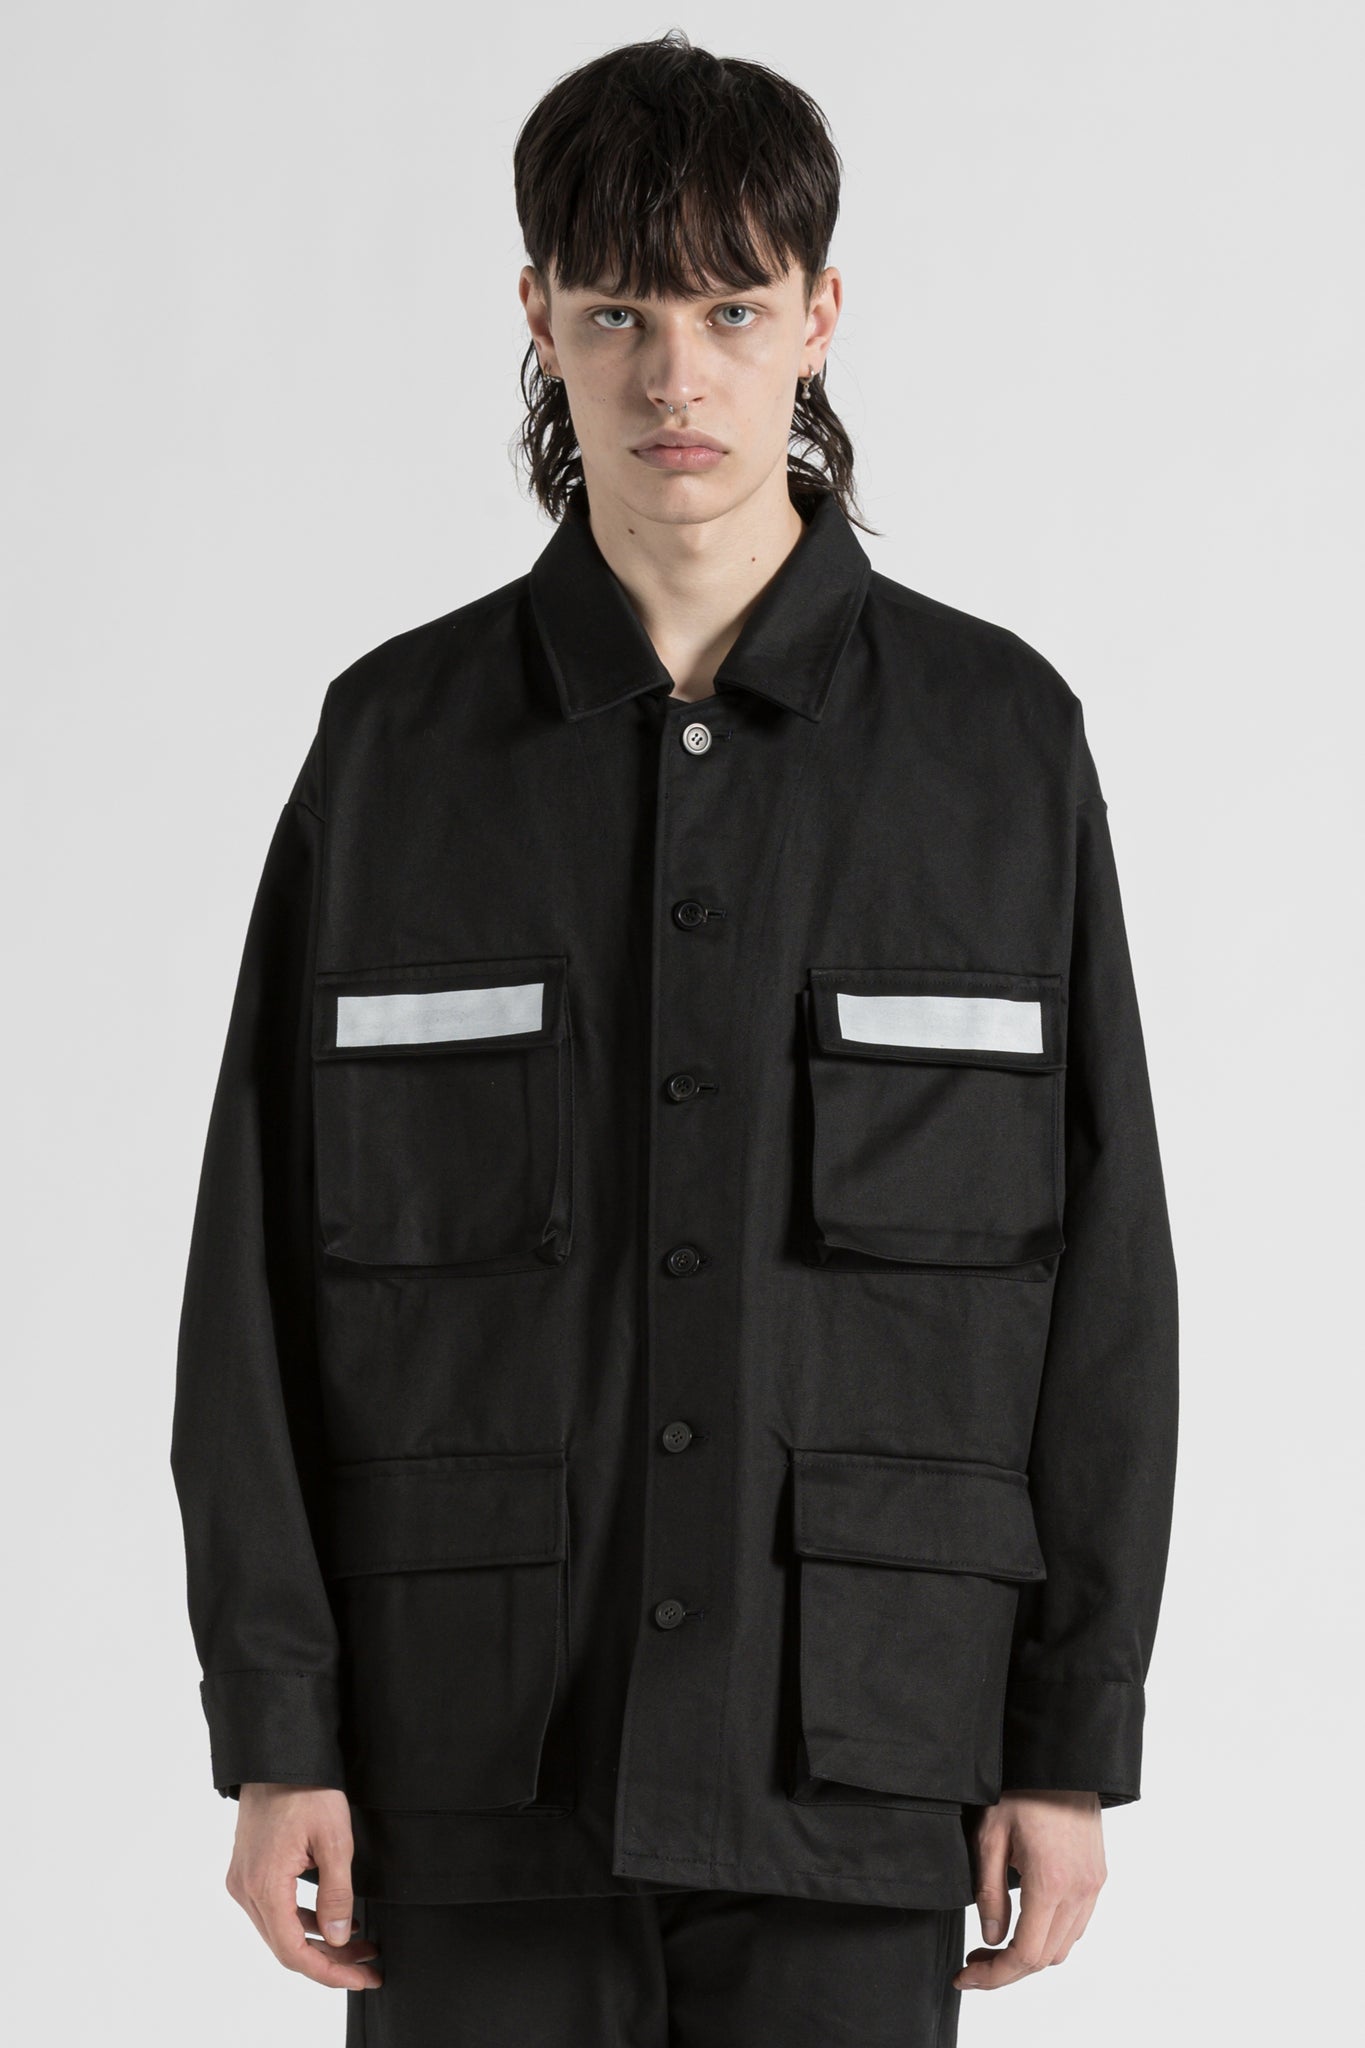 OUTER – FENNEL OFFICIAL EC STORE